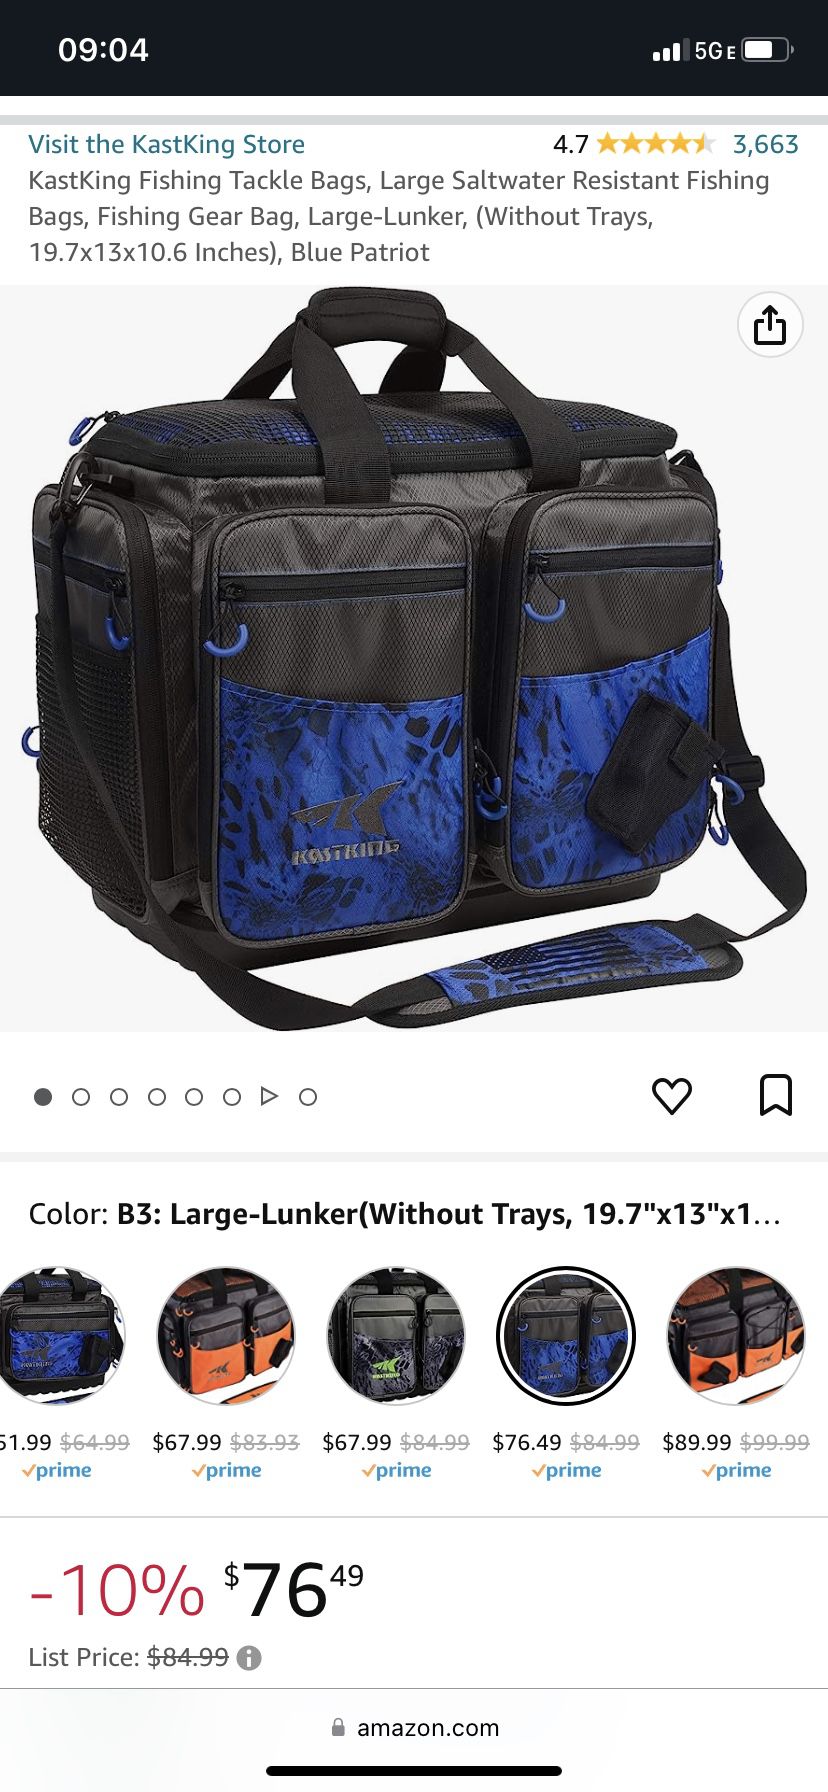 KastKing Fishing Tackle Bags, Large Saltwater Resistant Fishing Bags,  Fishing Gear Bag, Large-Lunker, (Without Trays, 19.7x13x10.6 Inches), Blue